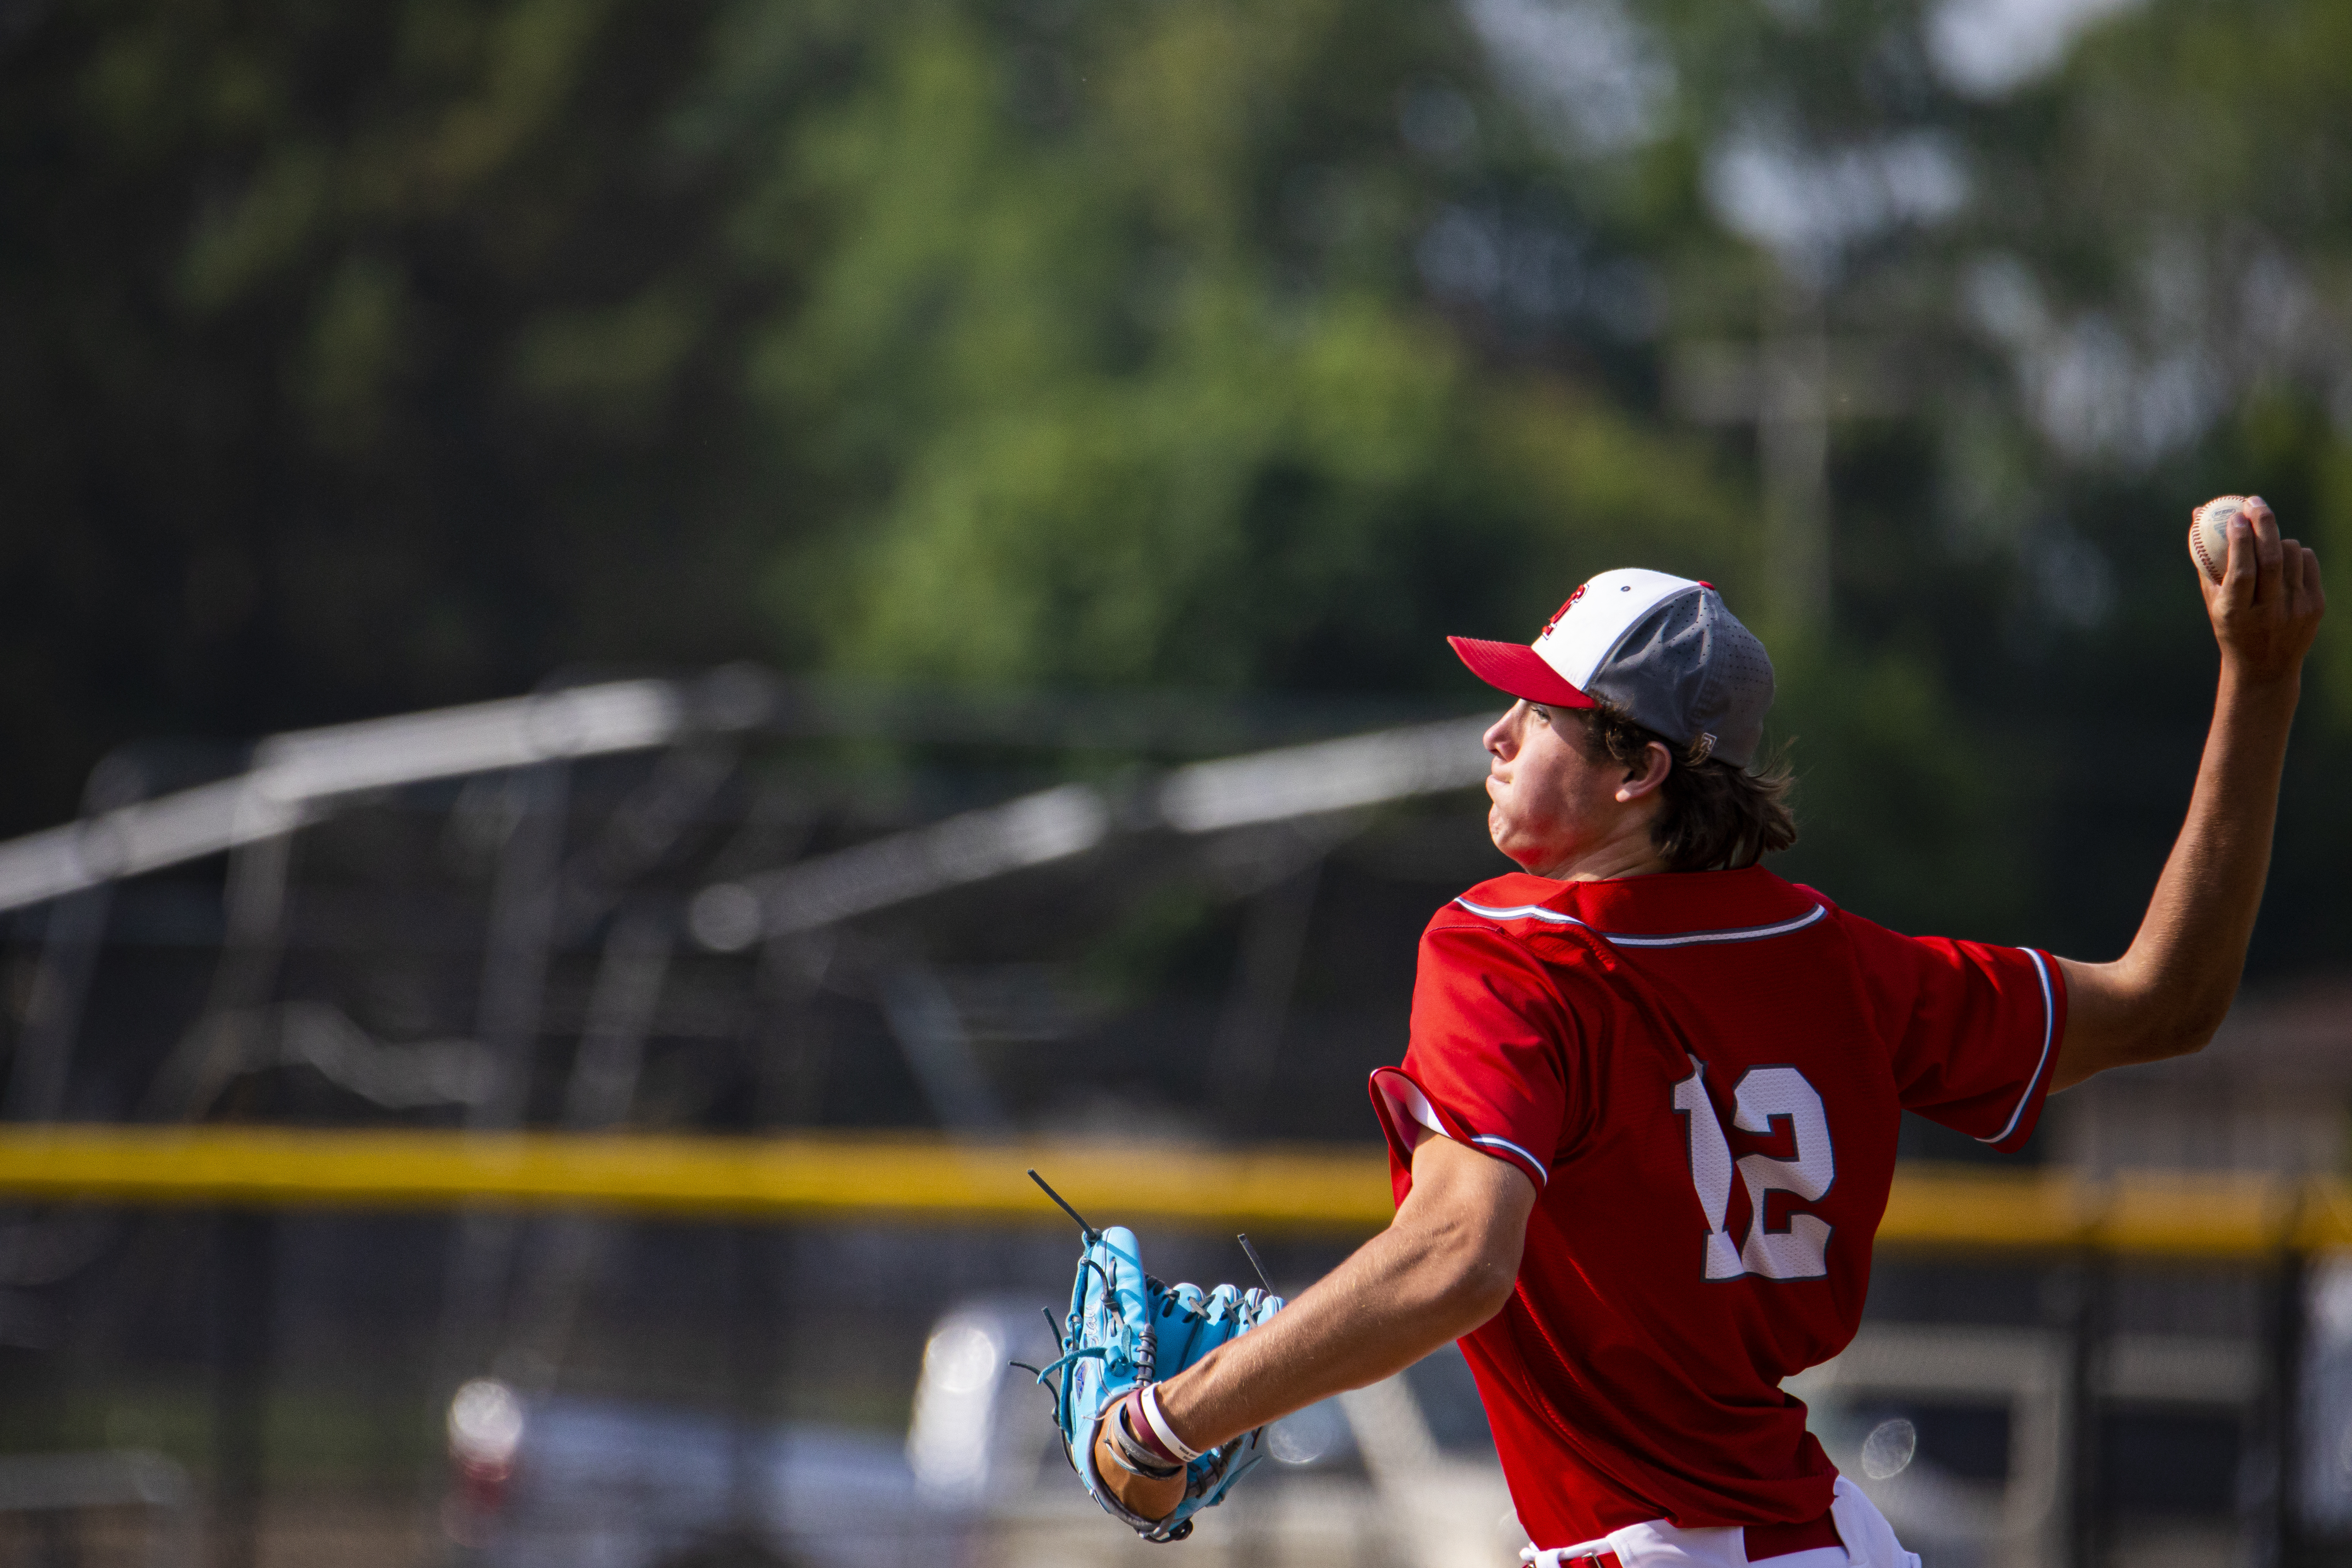 Hurricanes baseball season ends with 7-2 loss in Regionals to